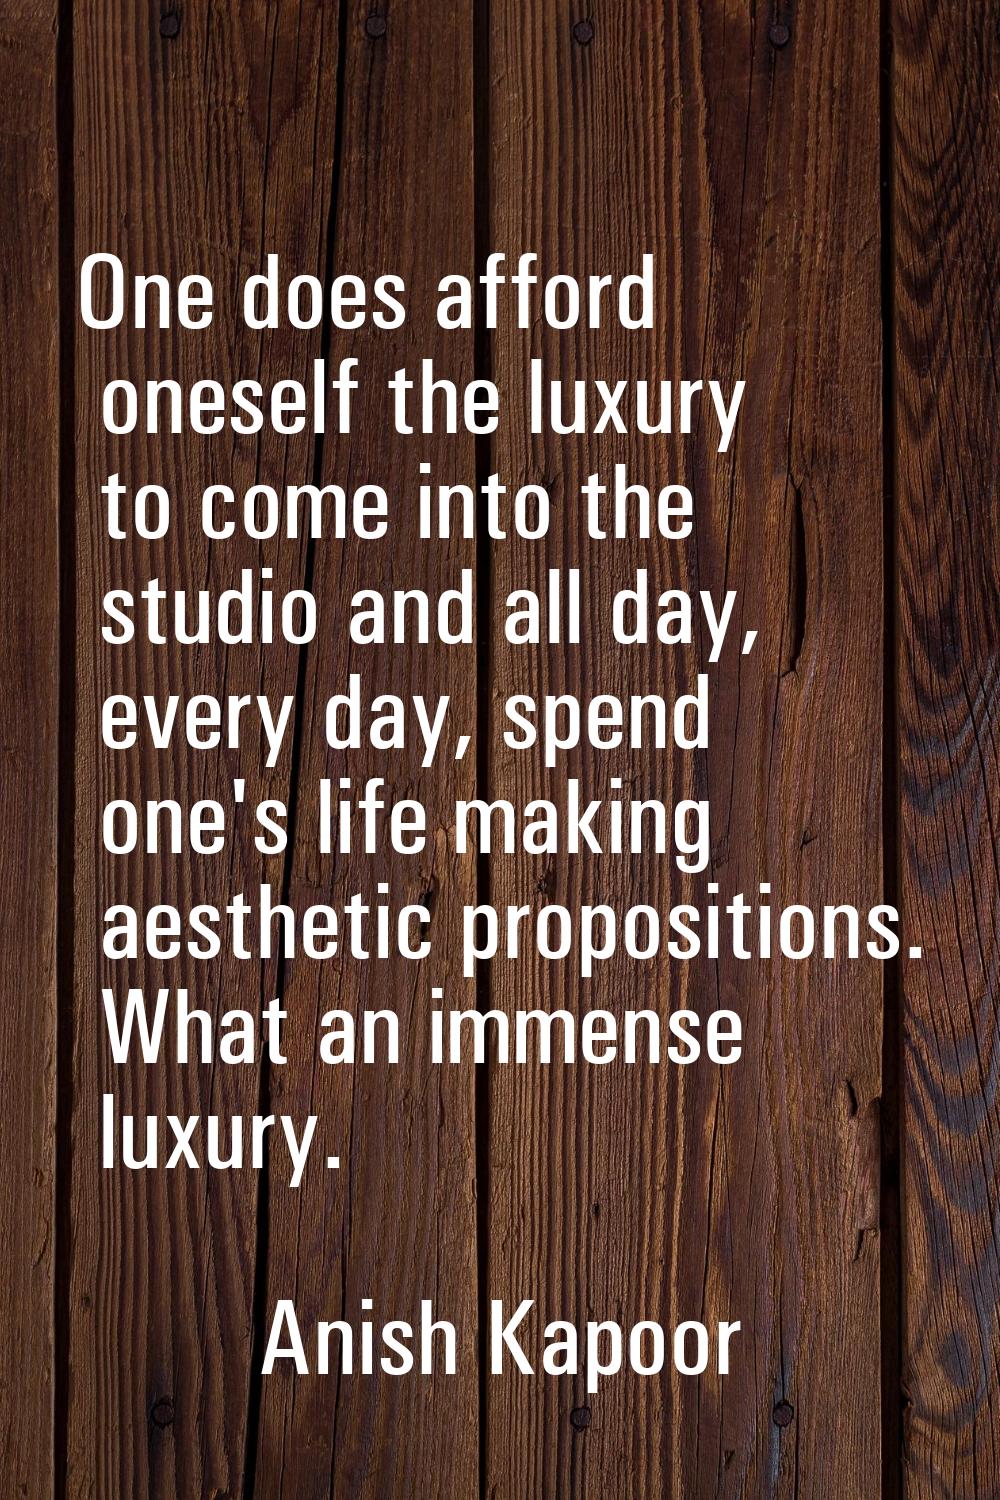 One does afford oneself the luxury to come into the studio and all day, every day, spend one's life